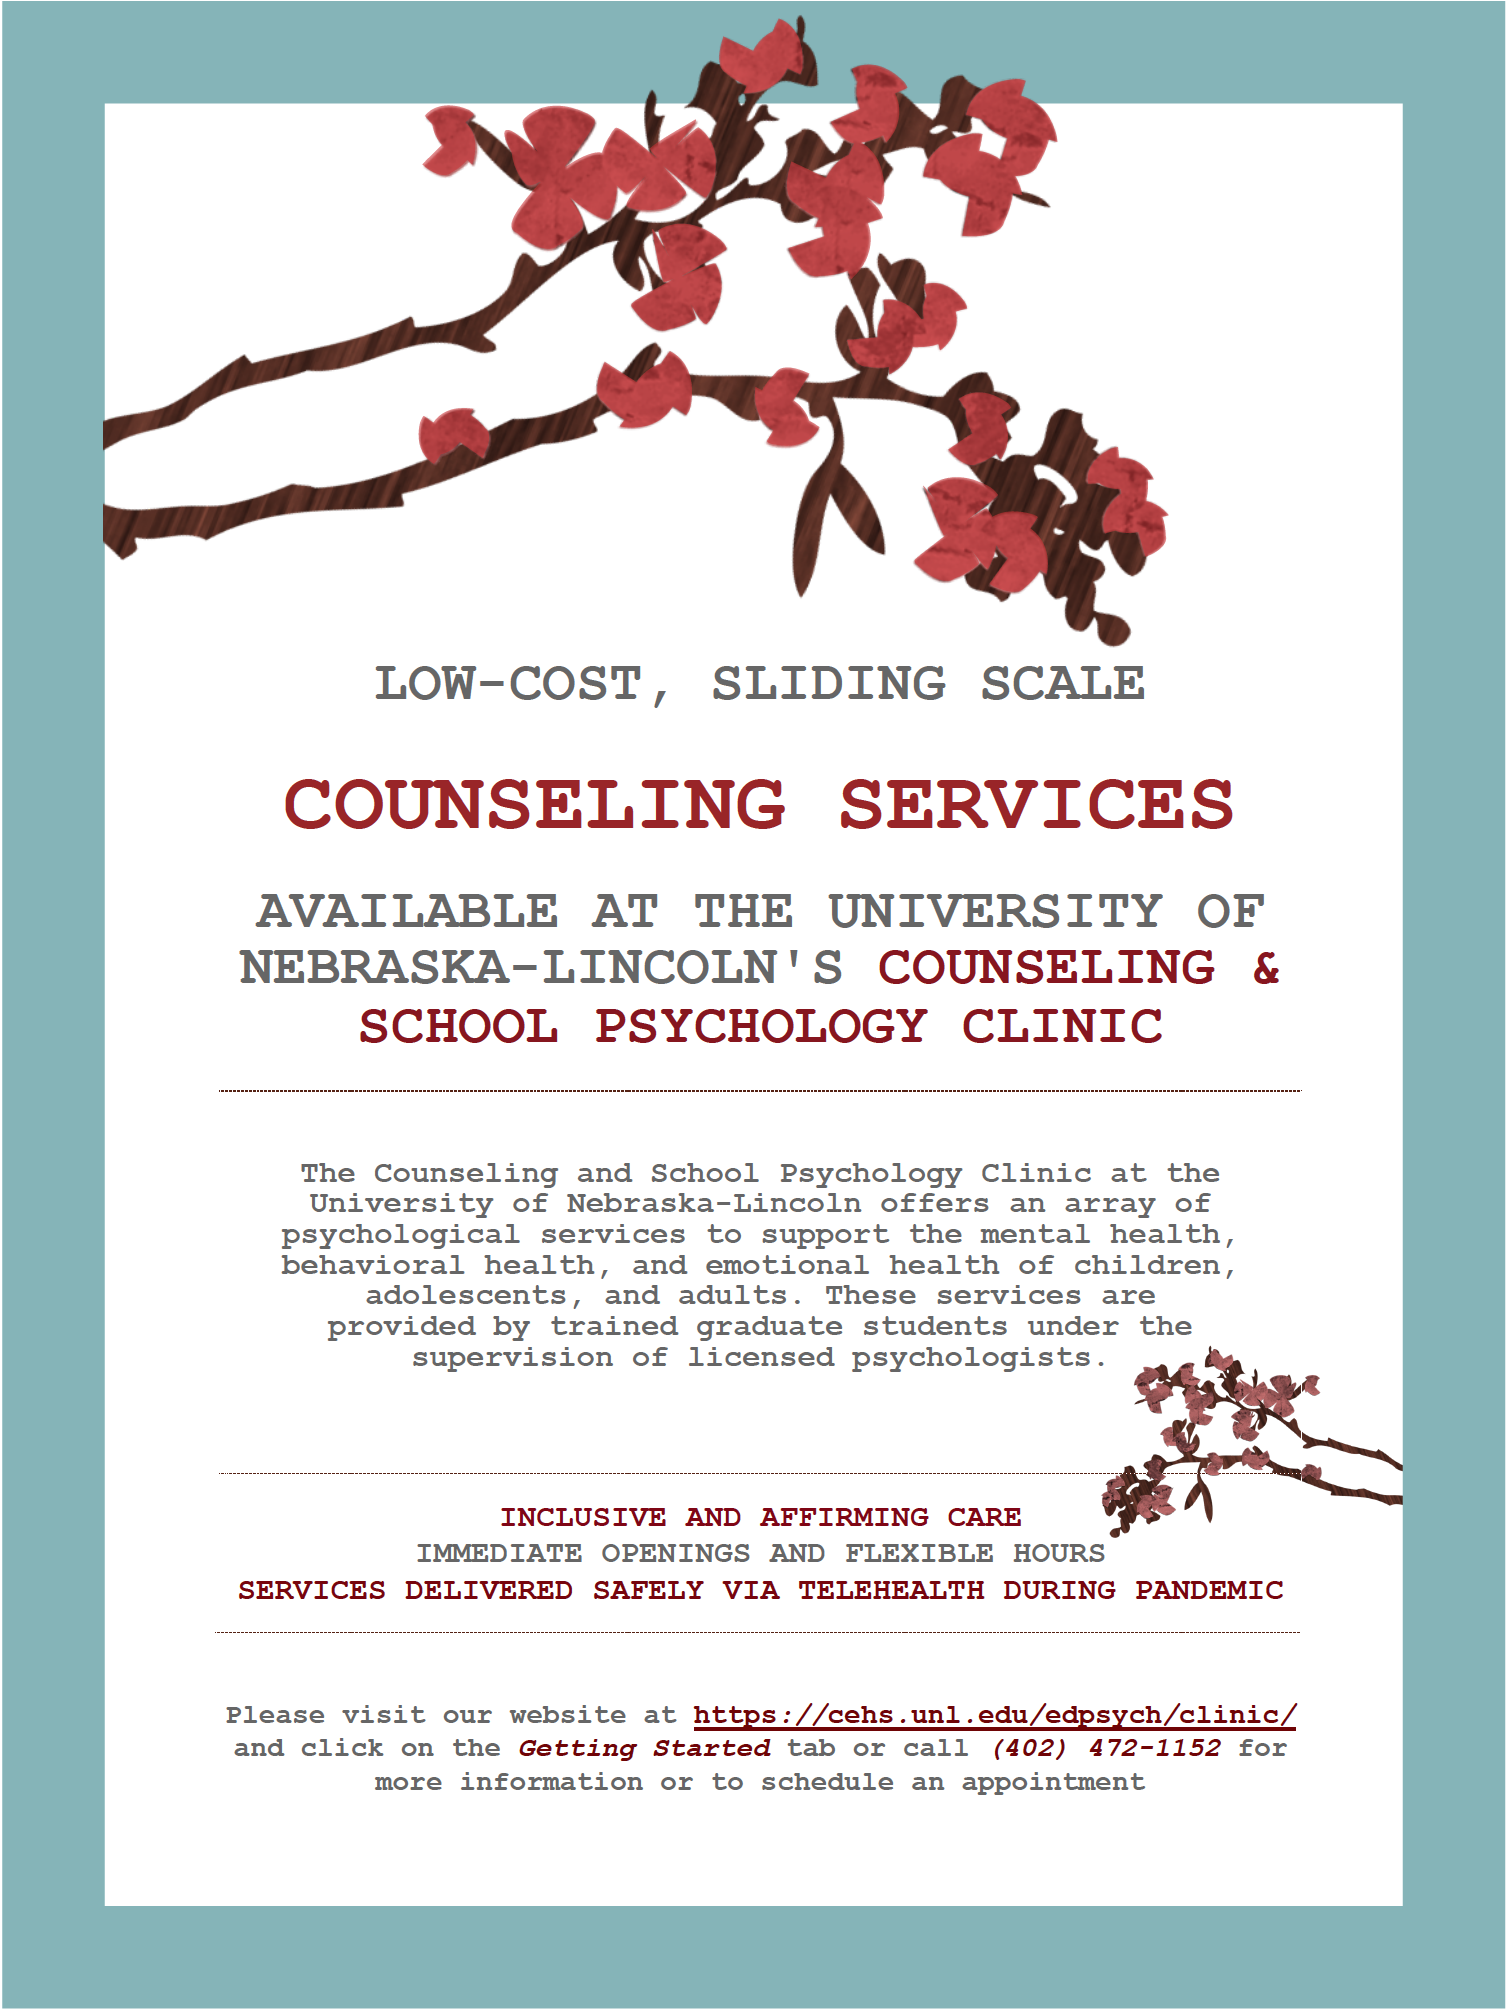 The Counseling and School Psychology Clinic (CSPC) located in Teacher's College Hall offers culturally sensitive and gender-affirming counseling to students, faculty, and staff at the University of Nebraska–Lincoln. 